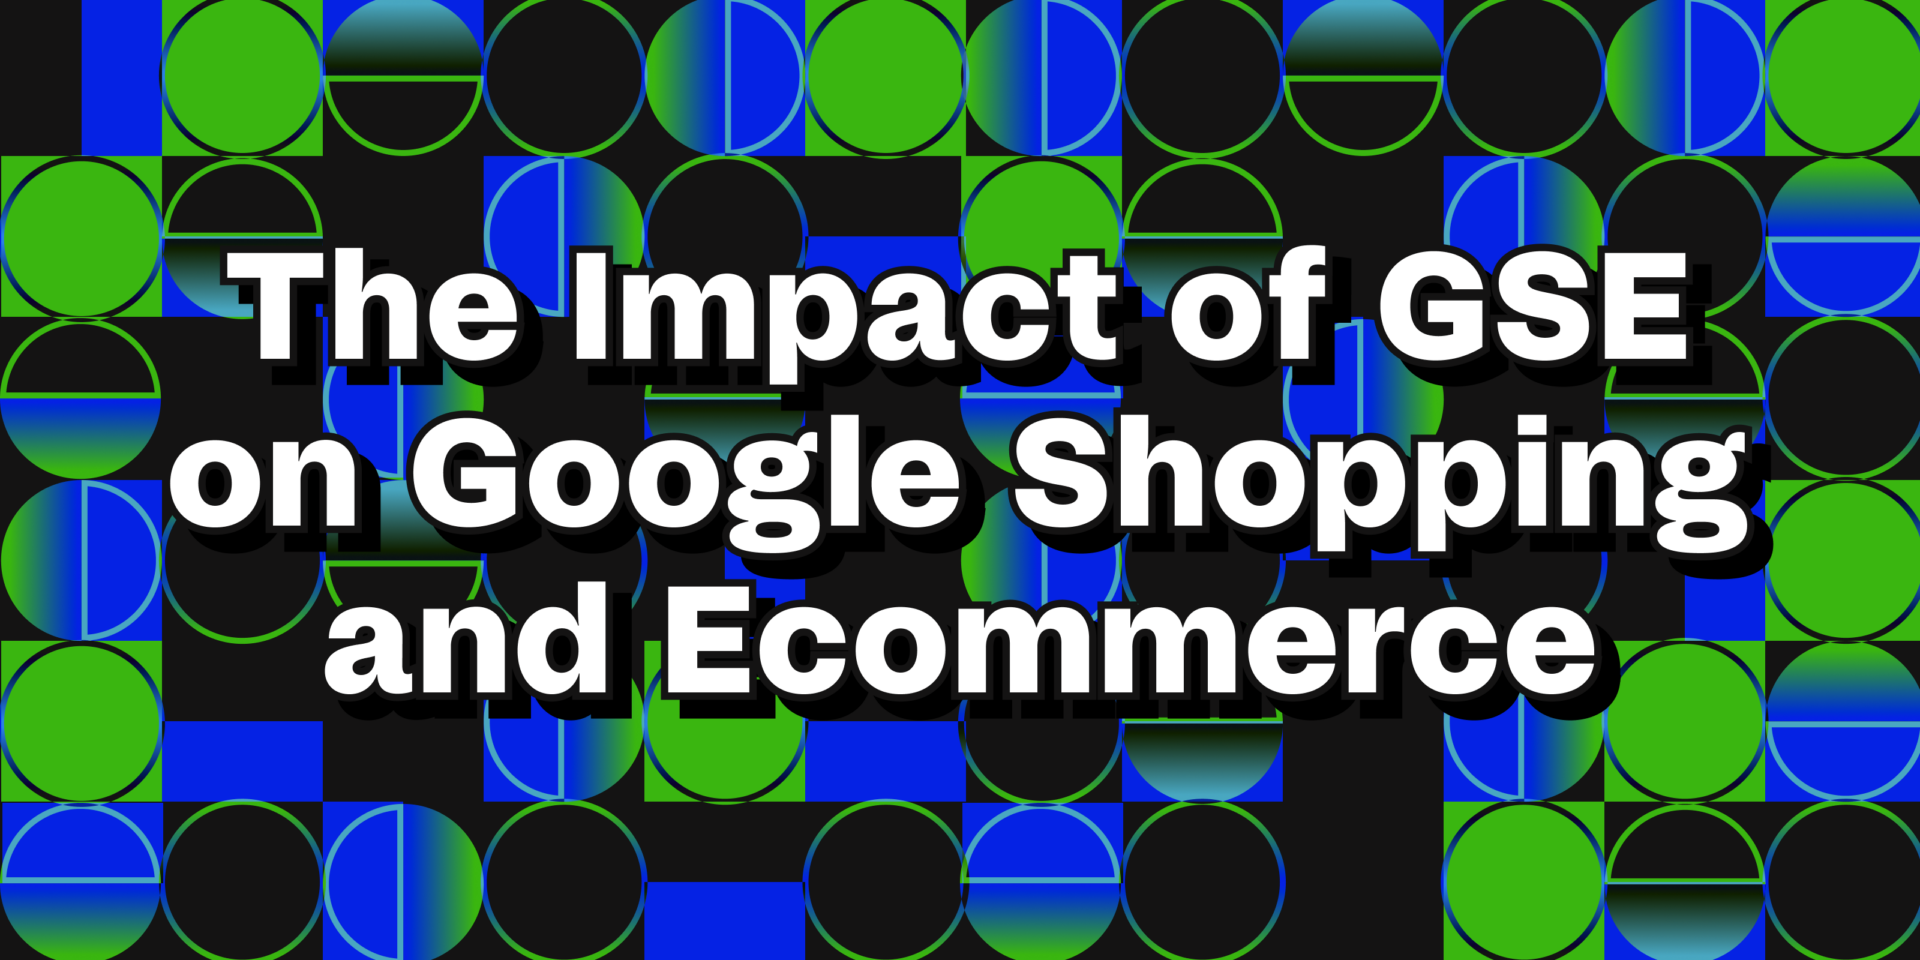 The impact of GSE on Google shopping and Ecommerce